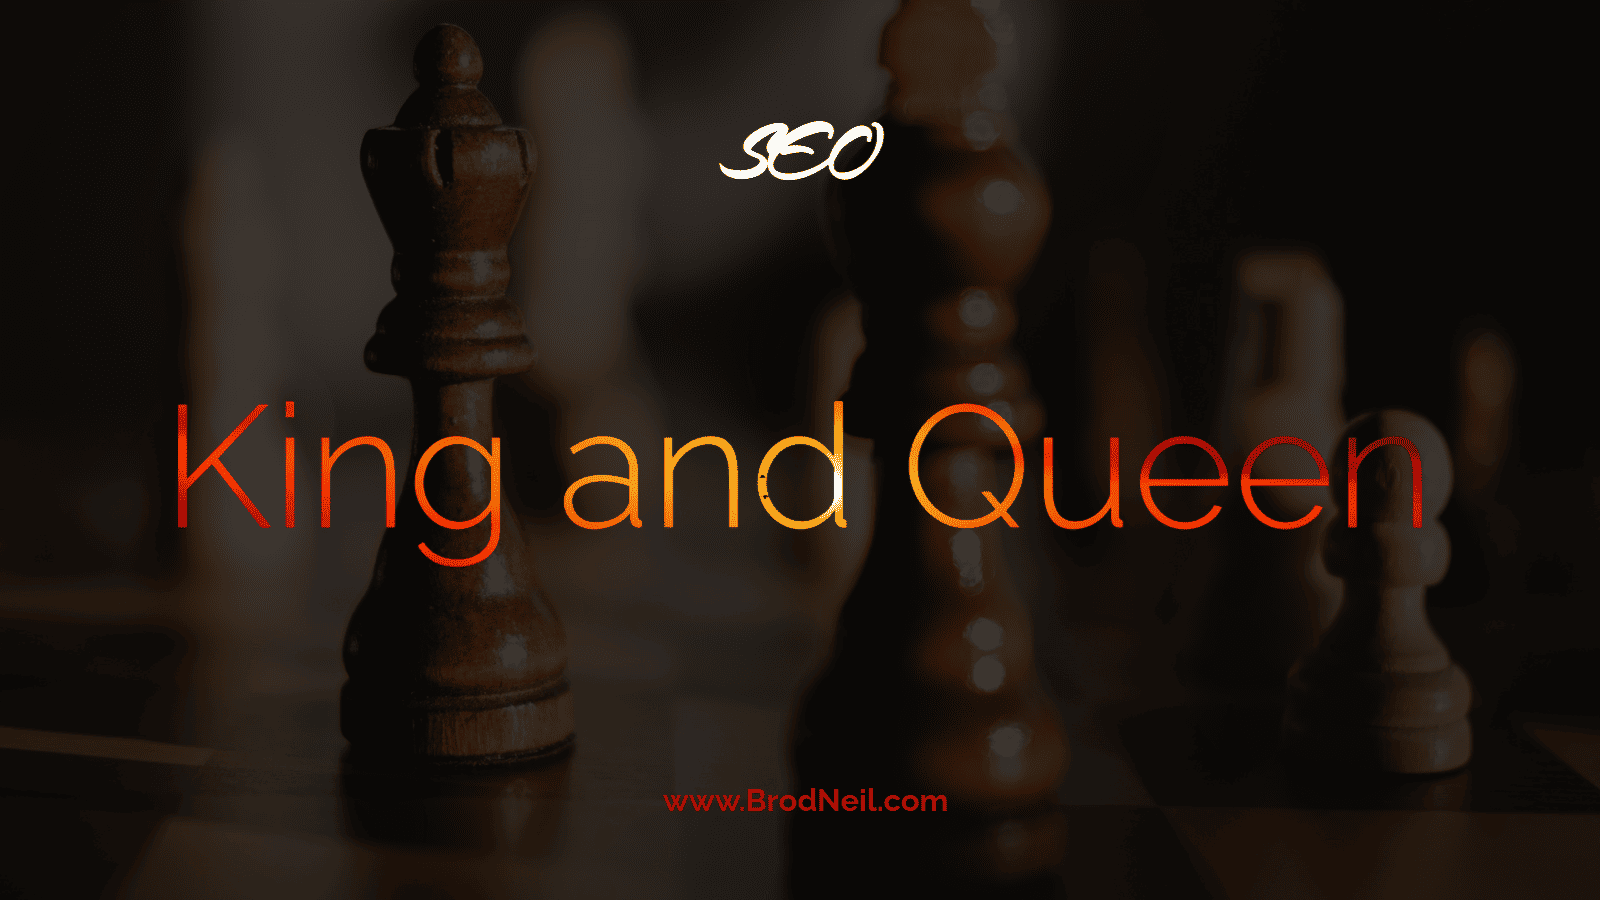 SEO and Chess